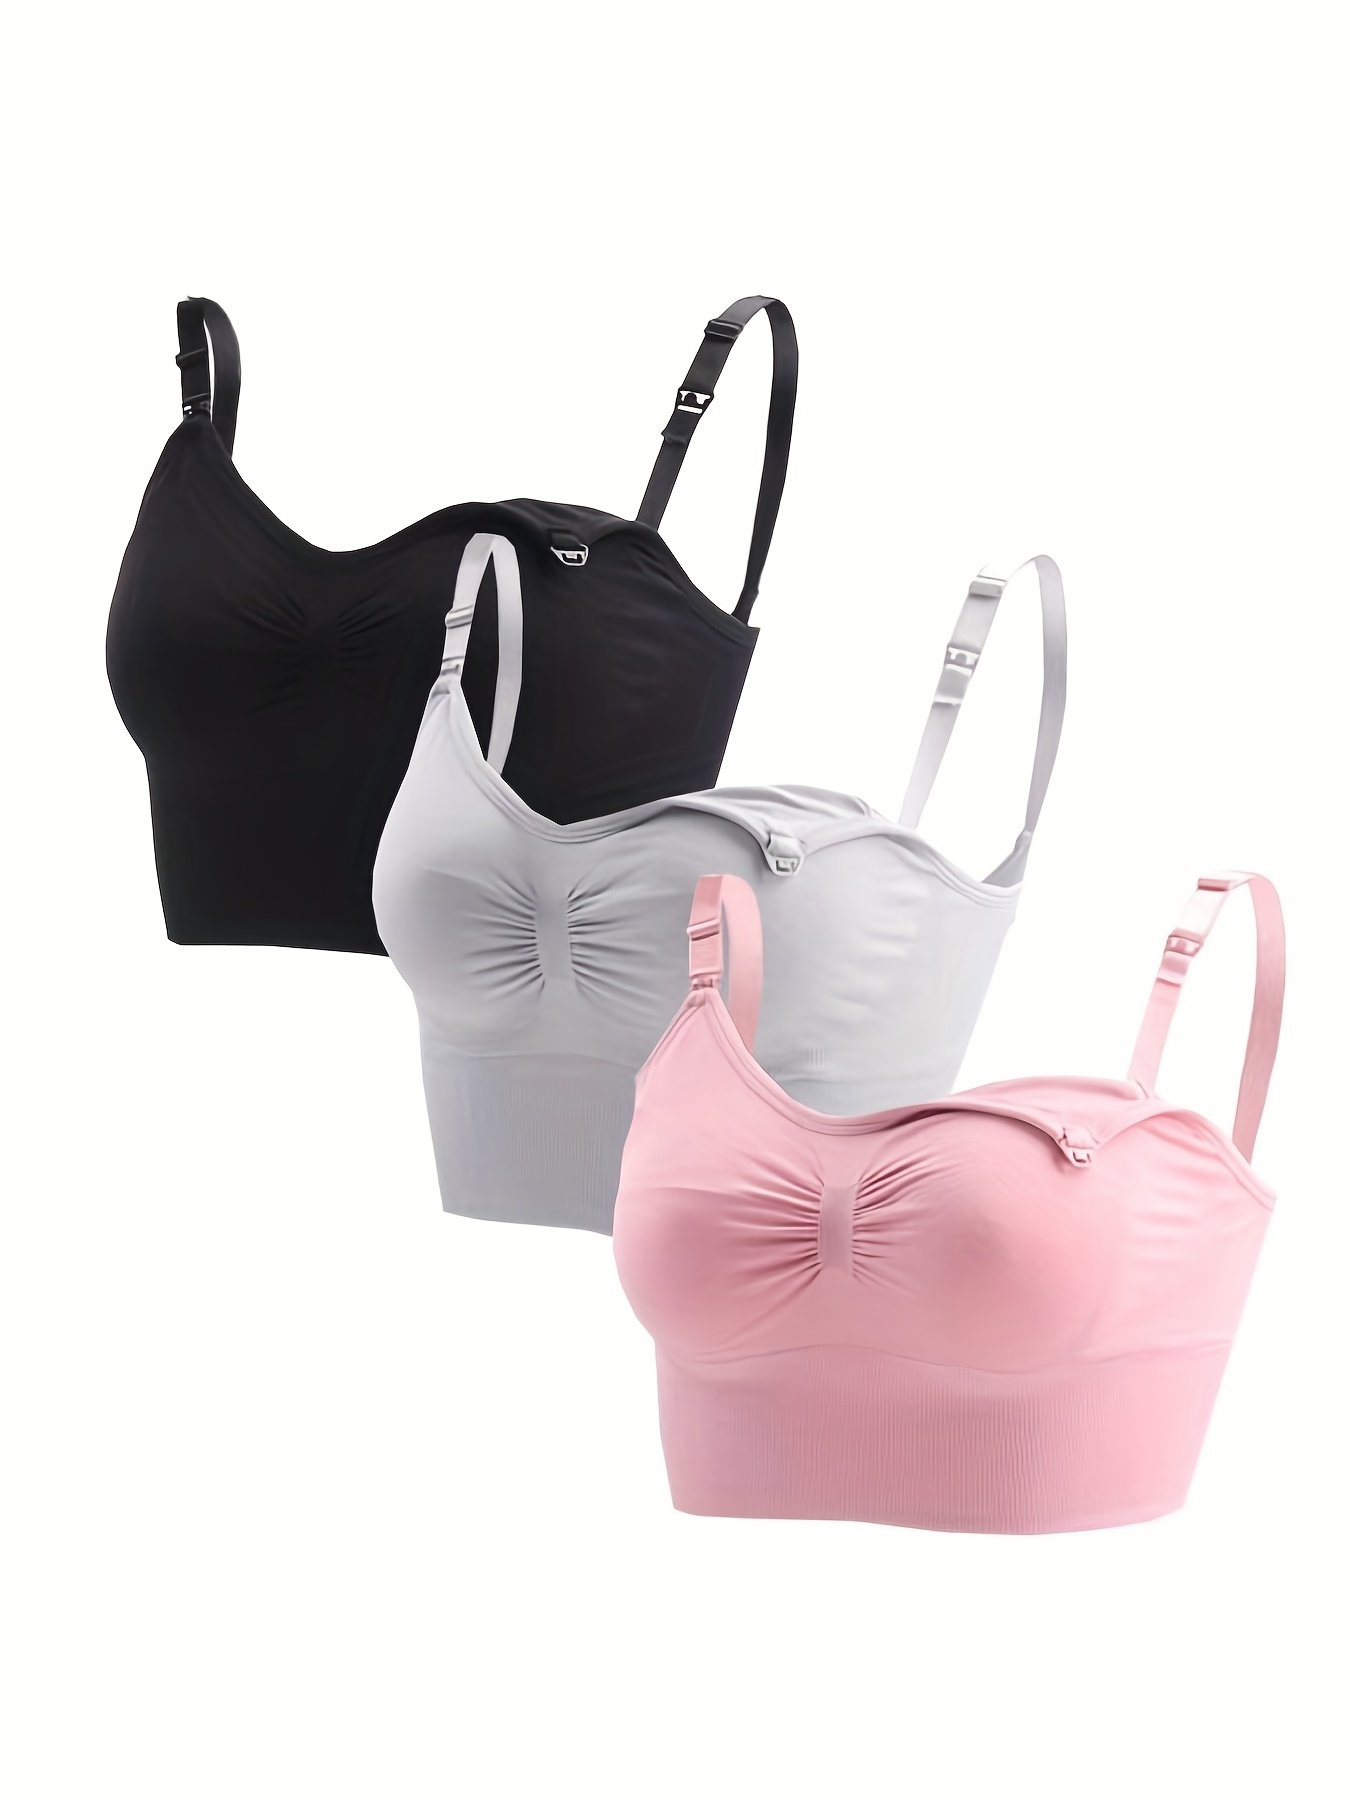 3PCS Women's Comfortable Sleep Wireless, Soft Cup Solid Material Bra